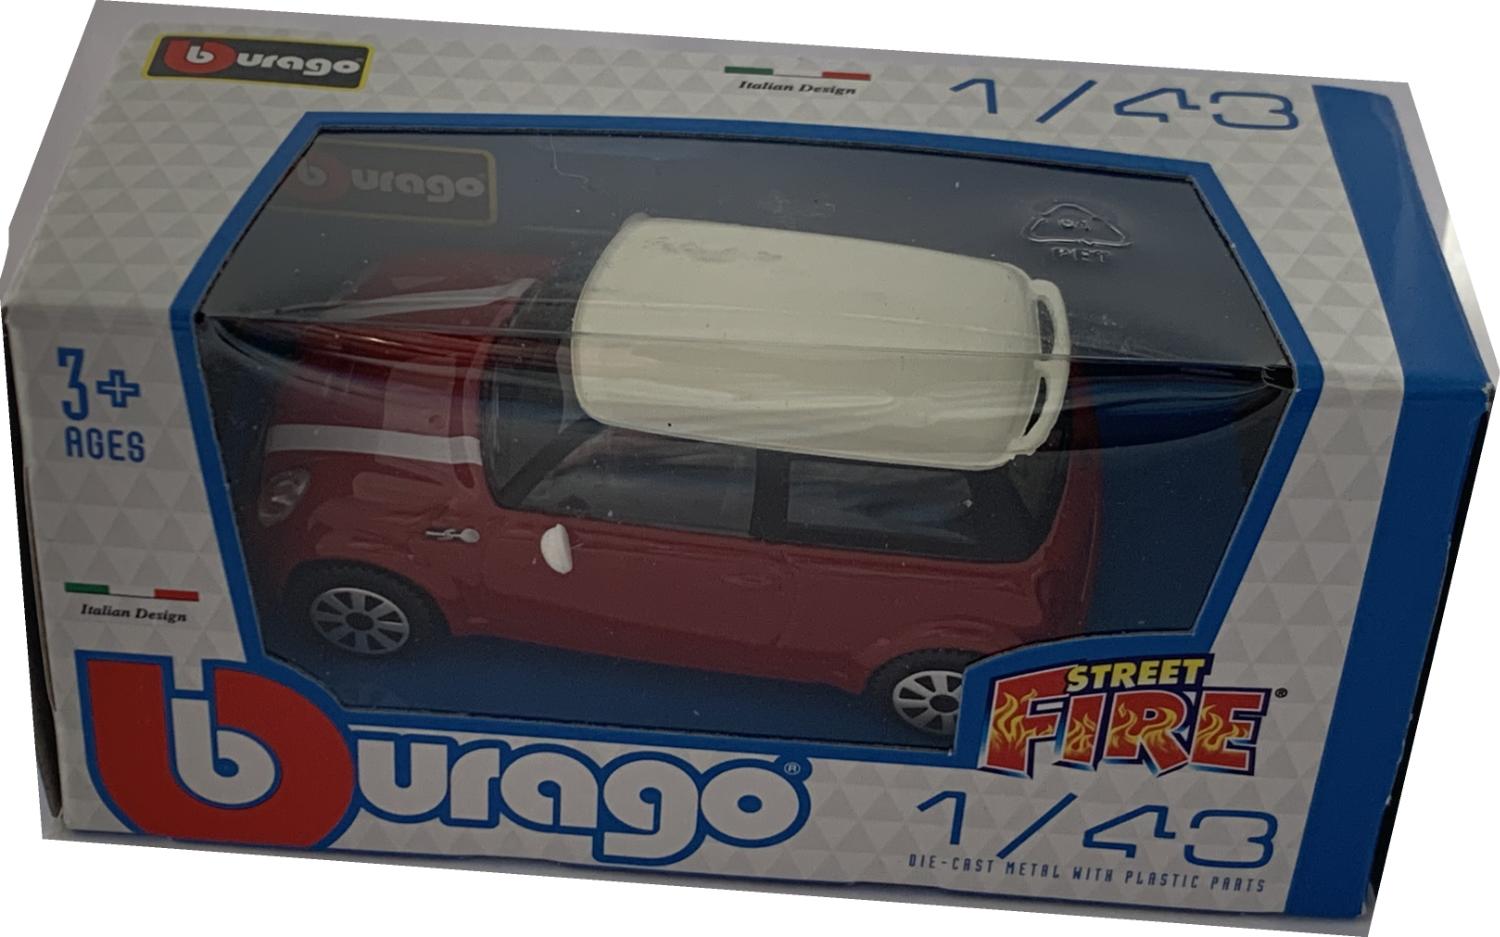 Mini Coopers S in red and white 1:43 scale model from Bburago, streetfire